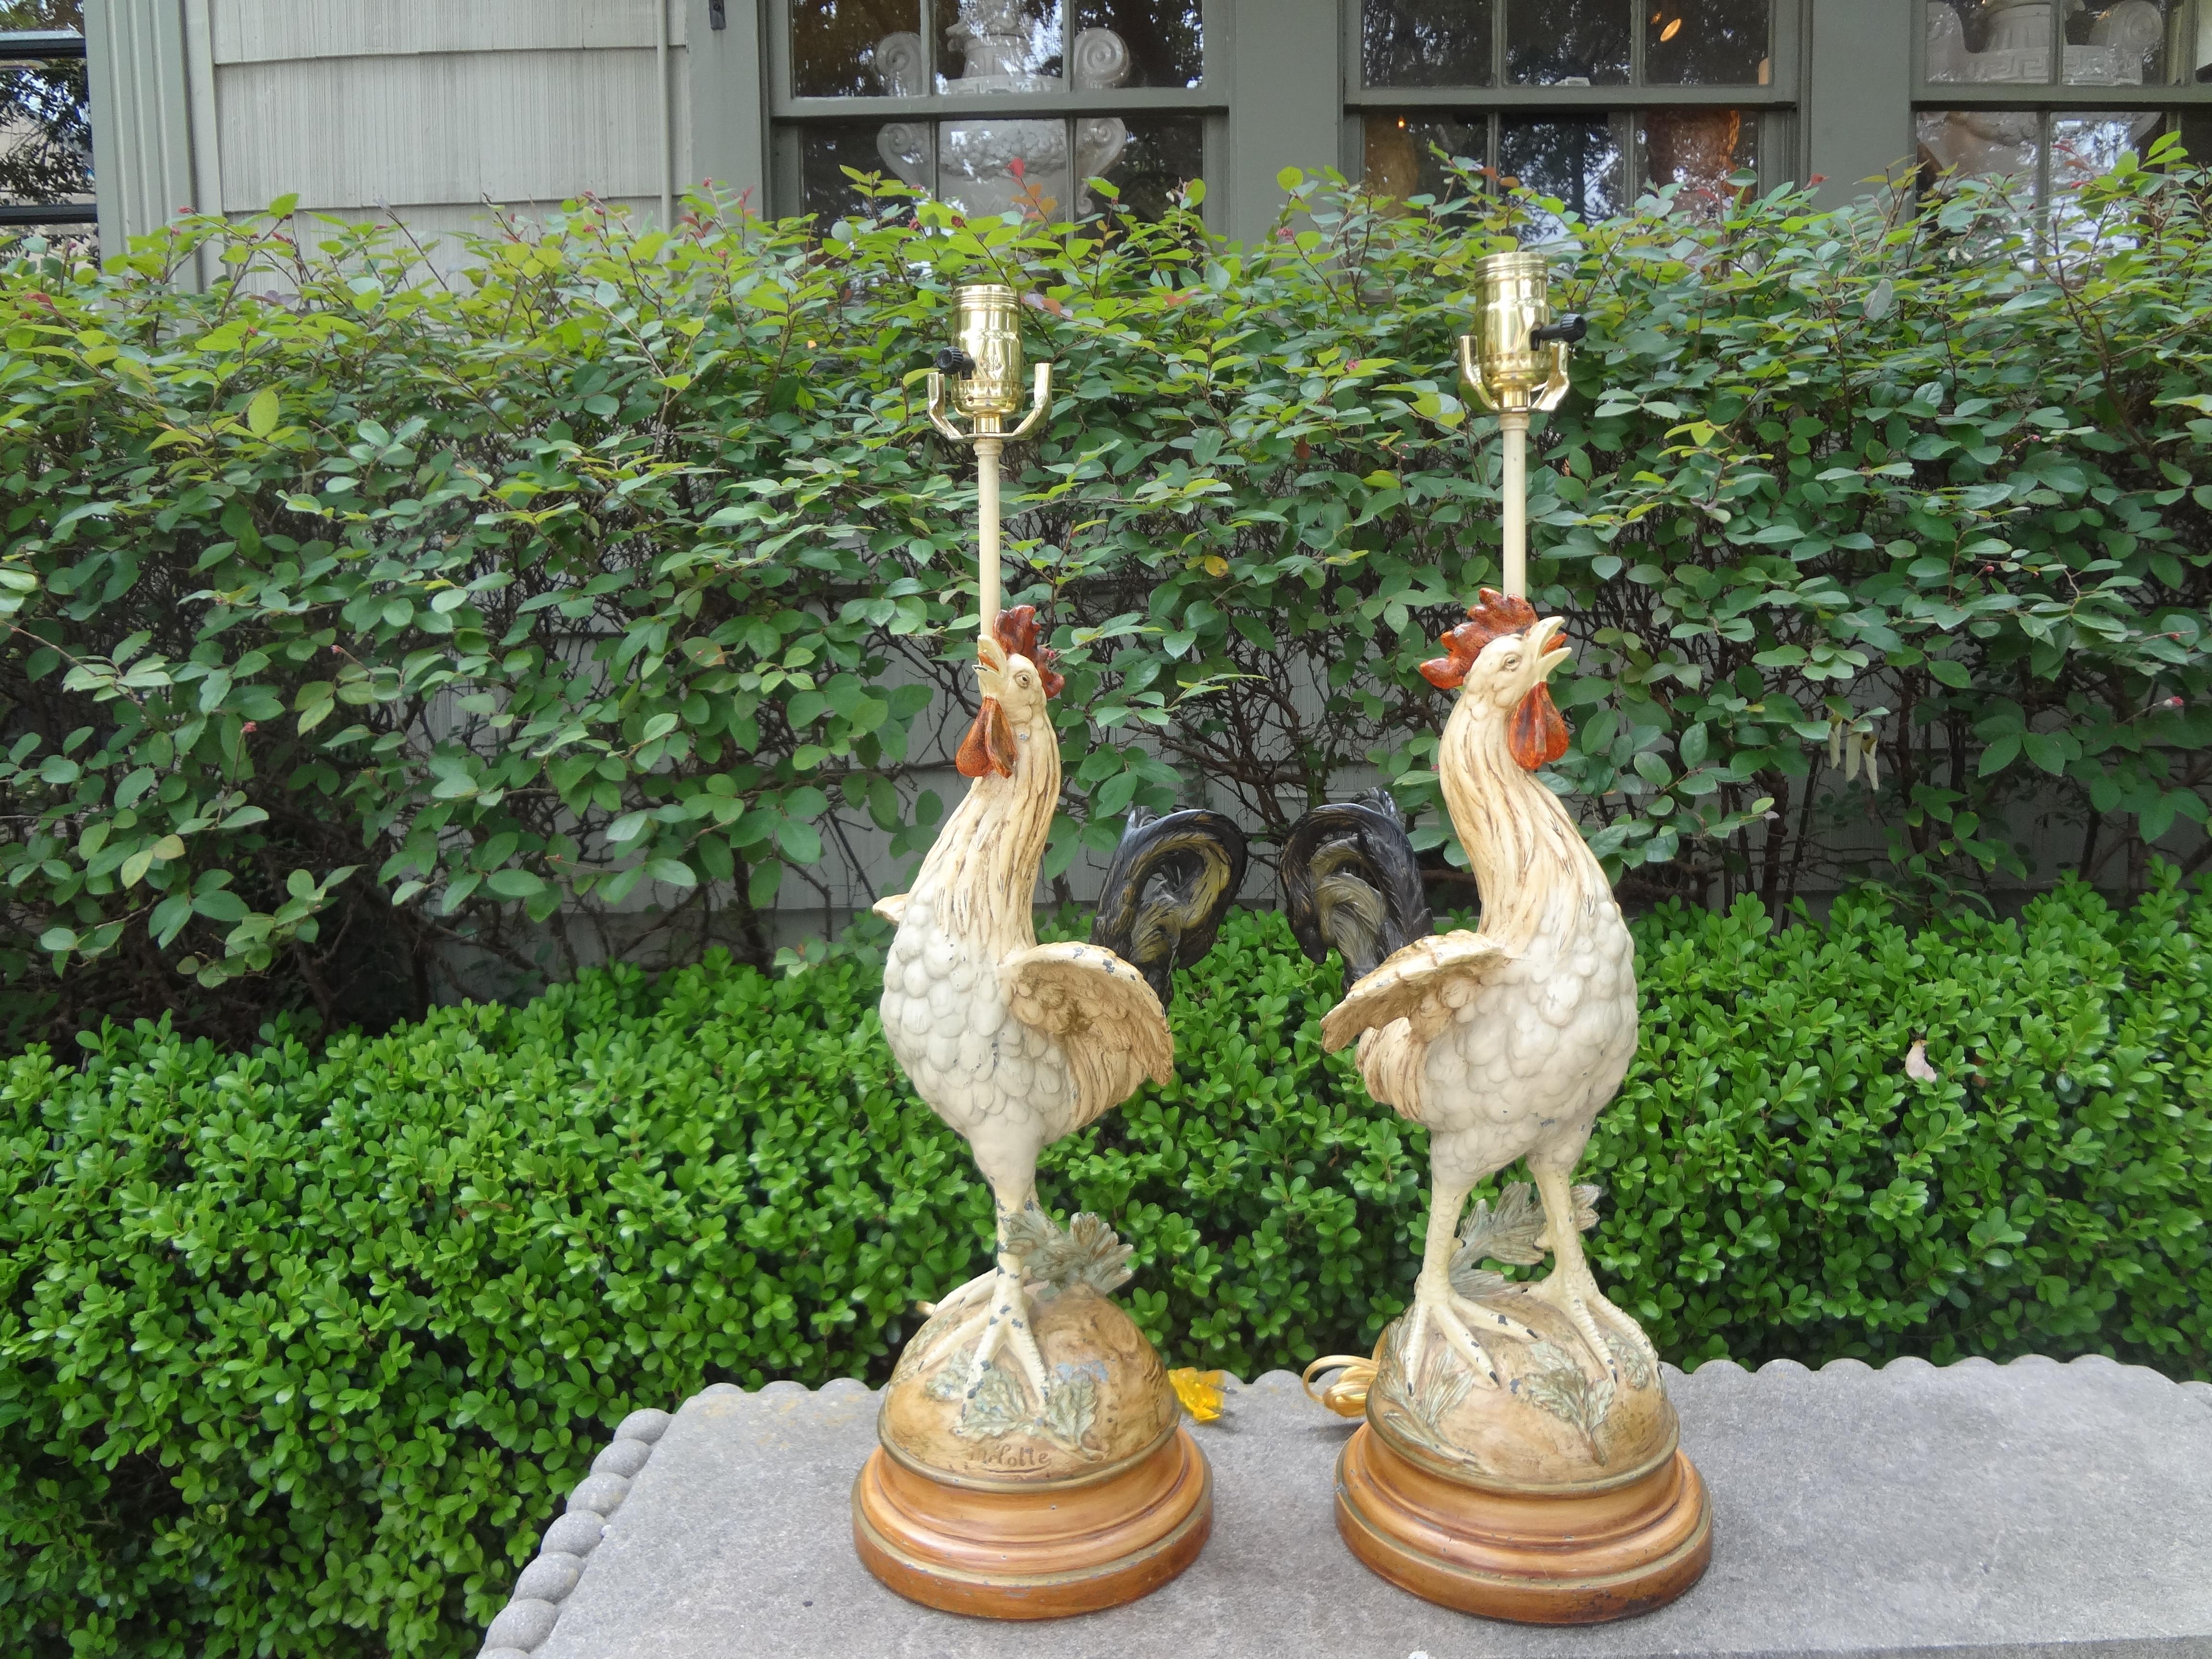 Pair of antique French cast iron rooster lamps.
Lovely pair of French polychromed cast iron rooster lamps. These French lamps are executed in a beautiful soft palette mounted on wood bases. Featured lamps are artist-signed and have been newly wired